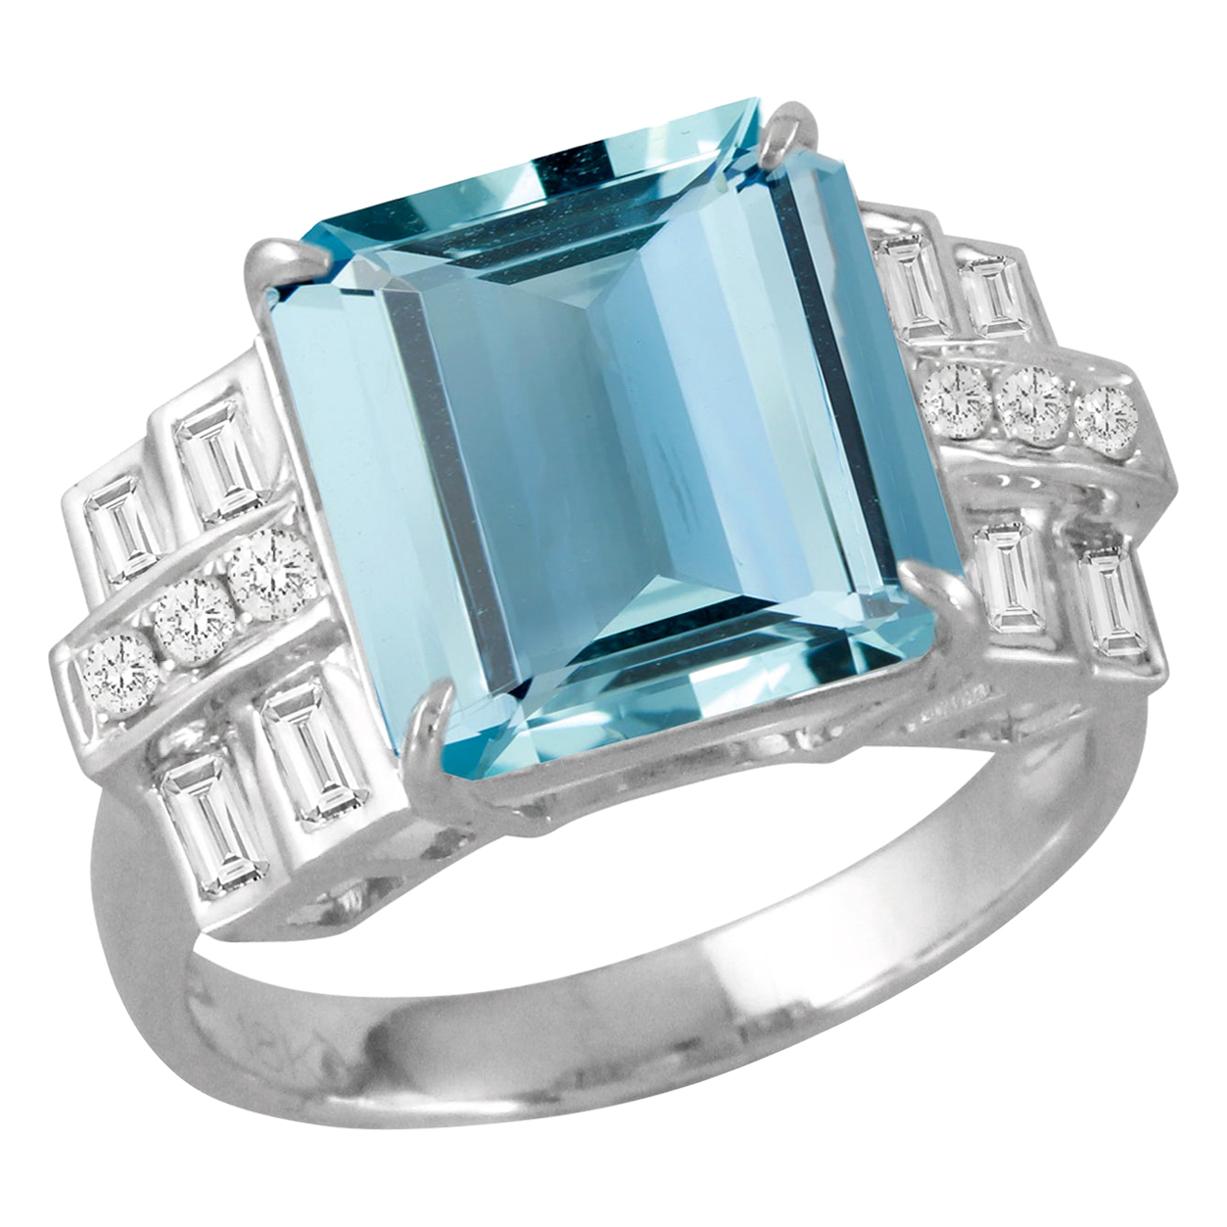 18 White Gold Karat Gold Square Aquamarine Cocktail Ring with Baguette Diamonds For Sale